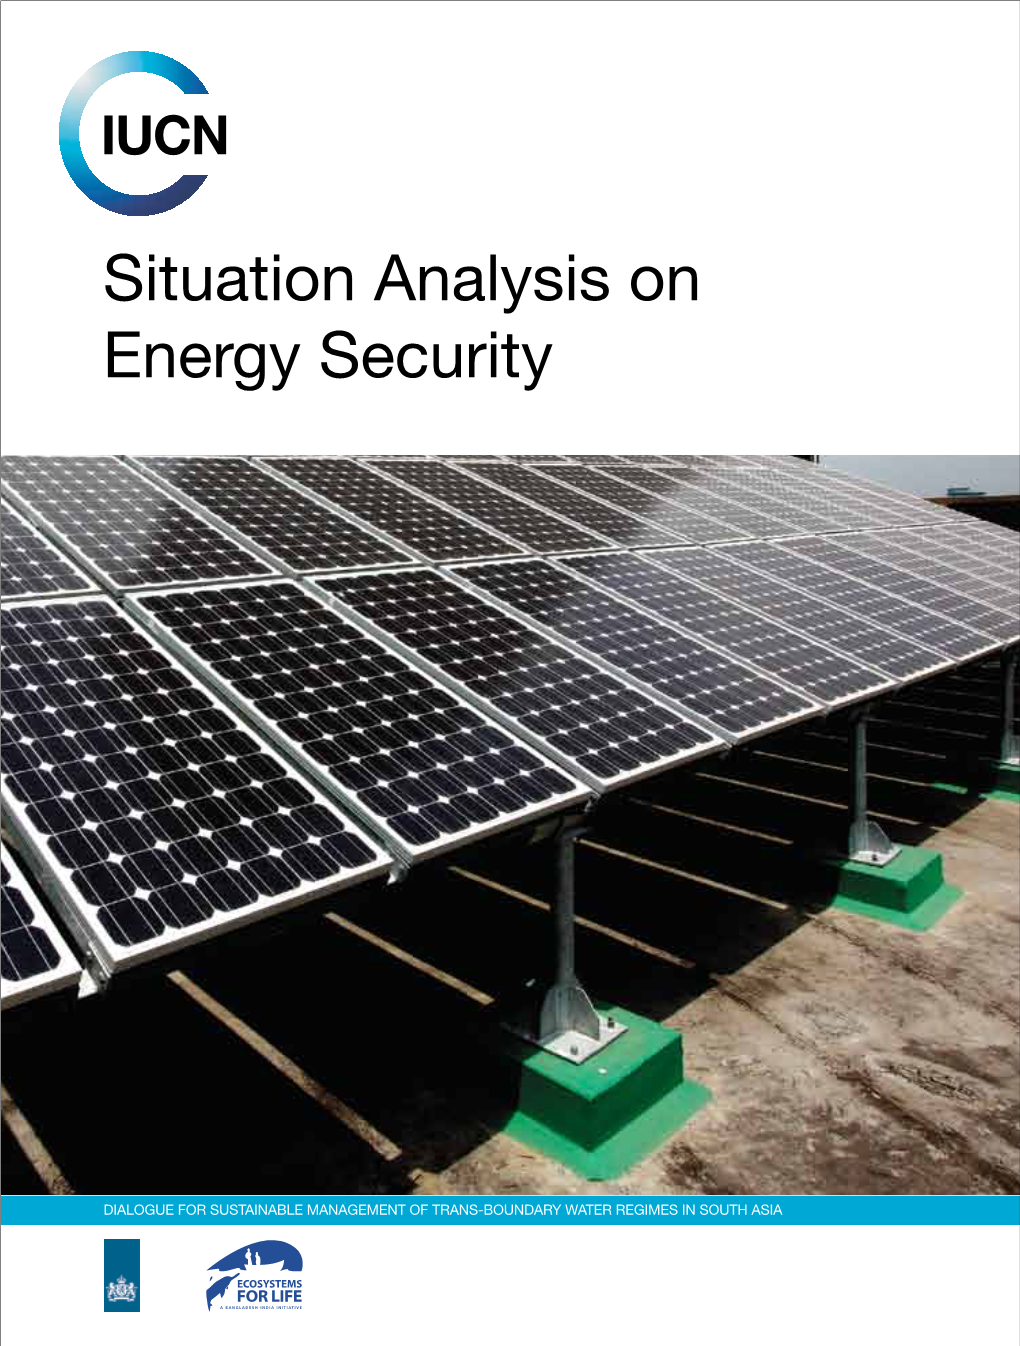 Situation Analysis on Energy Security